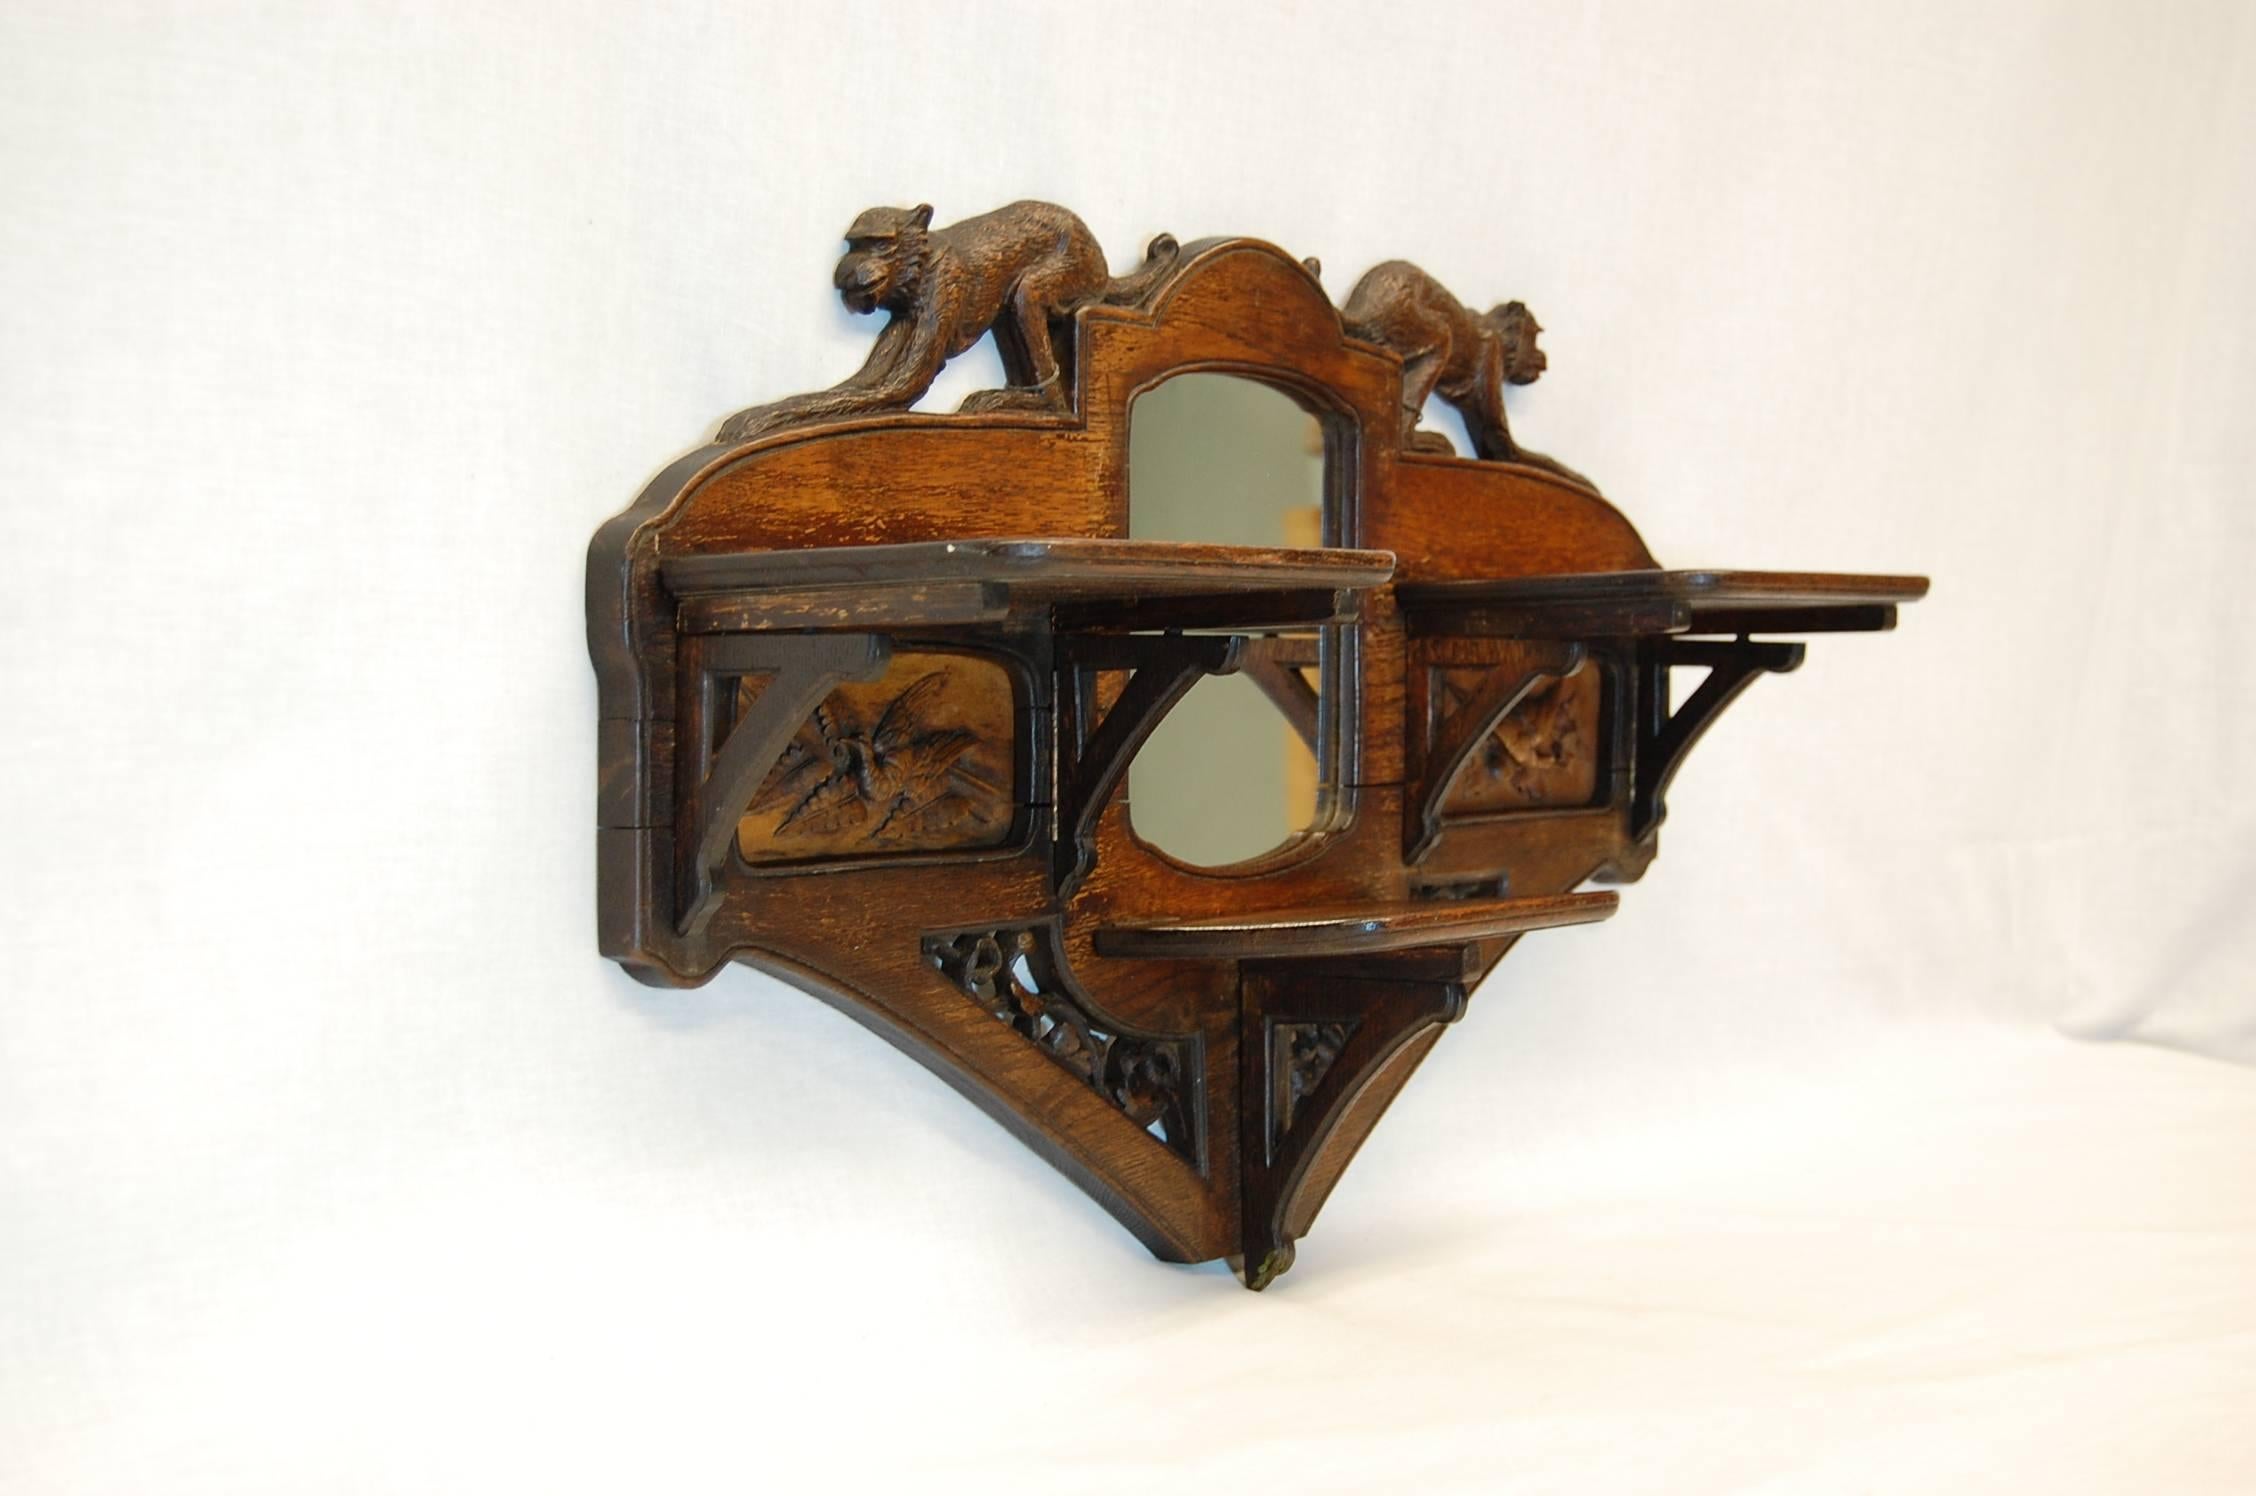 Black Forest Carved Oakwood Wall-Mounted Shaving Mirror with Flip-Up Shelves, circa 1890